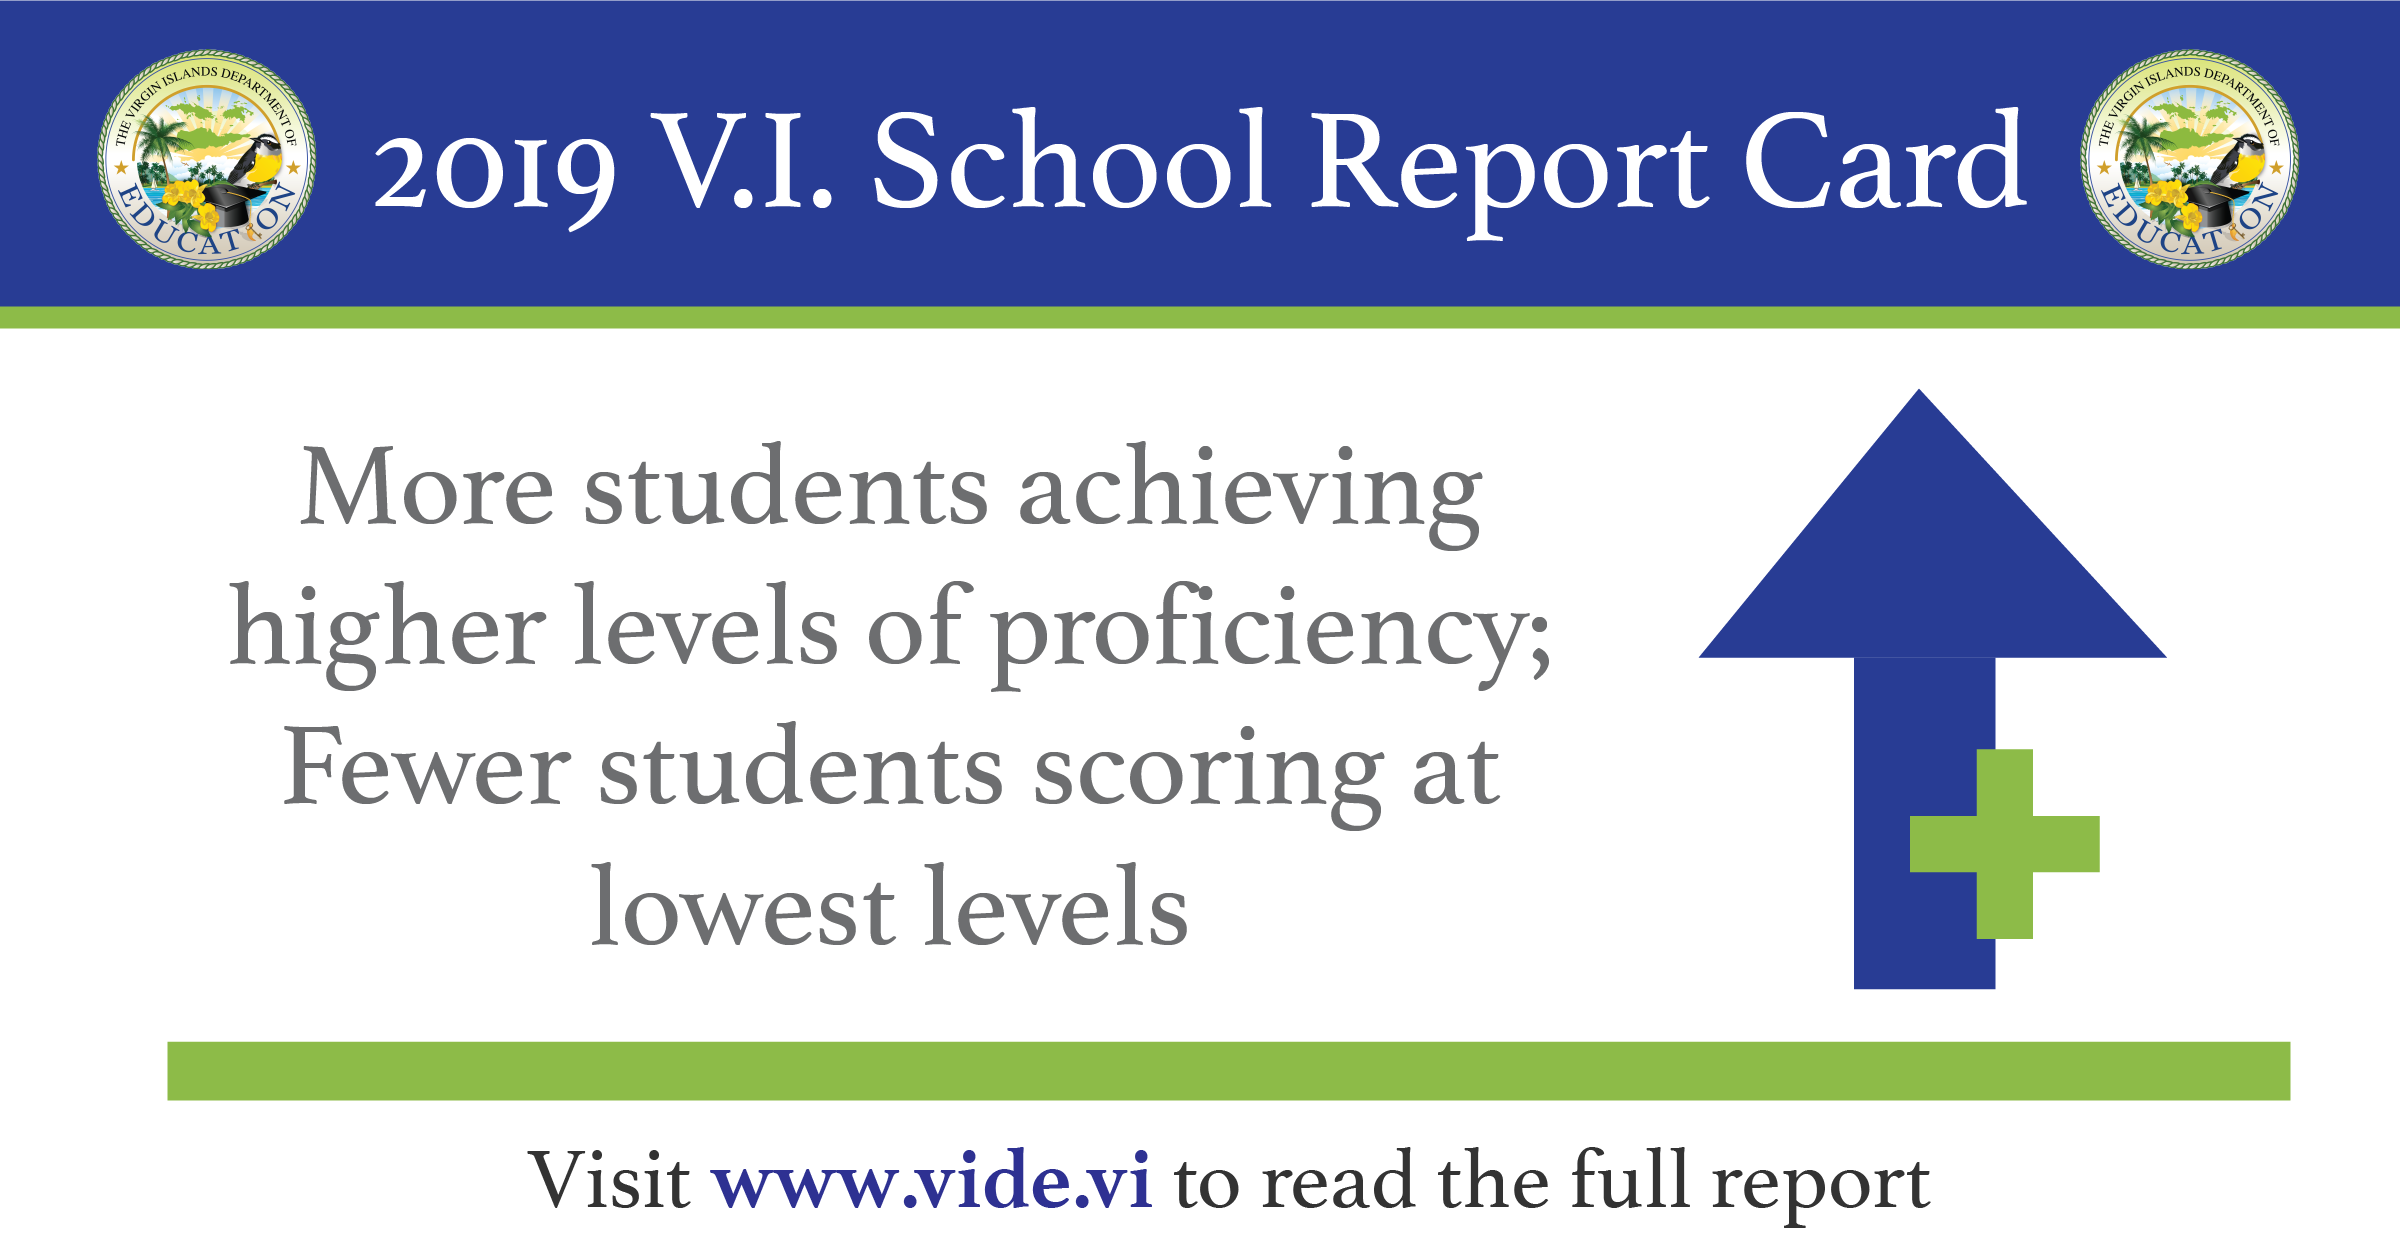 DOE VI REPORT CARD - More achievers of higher proficiency-01.png